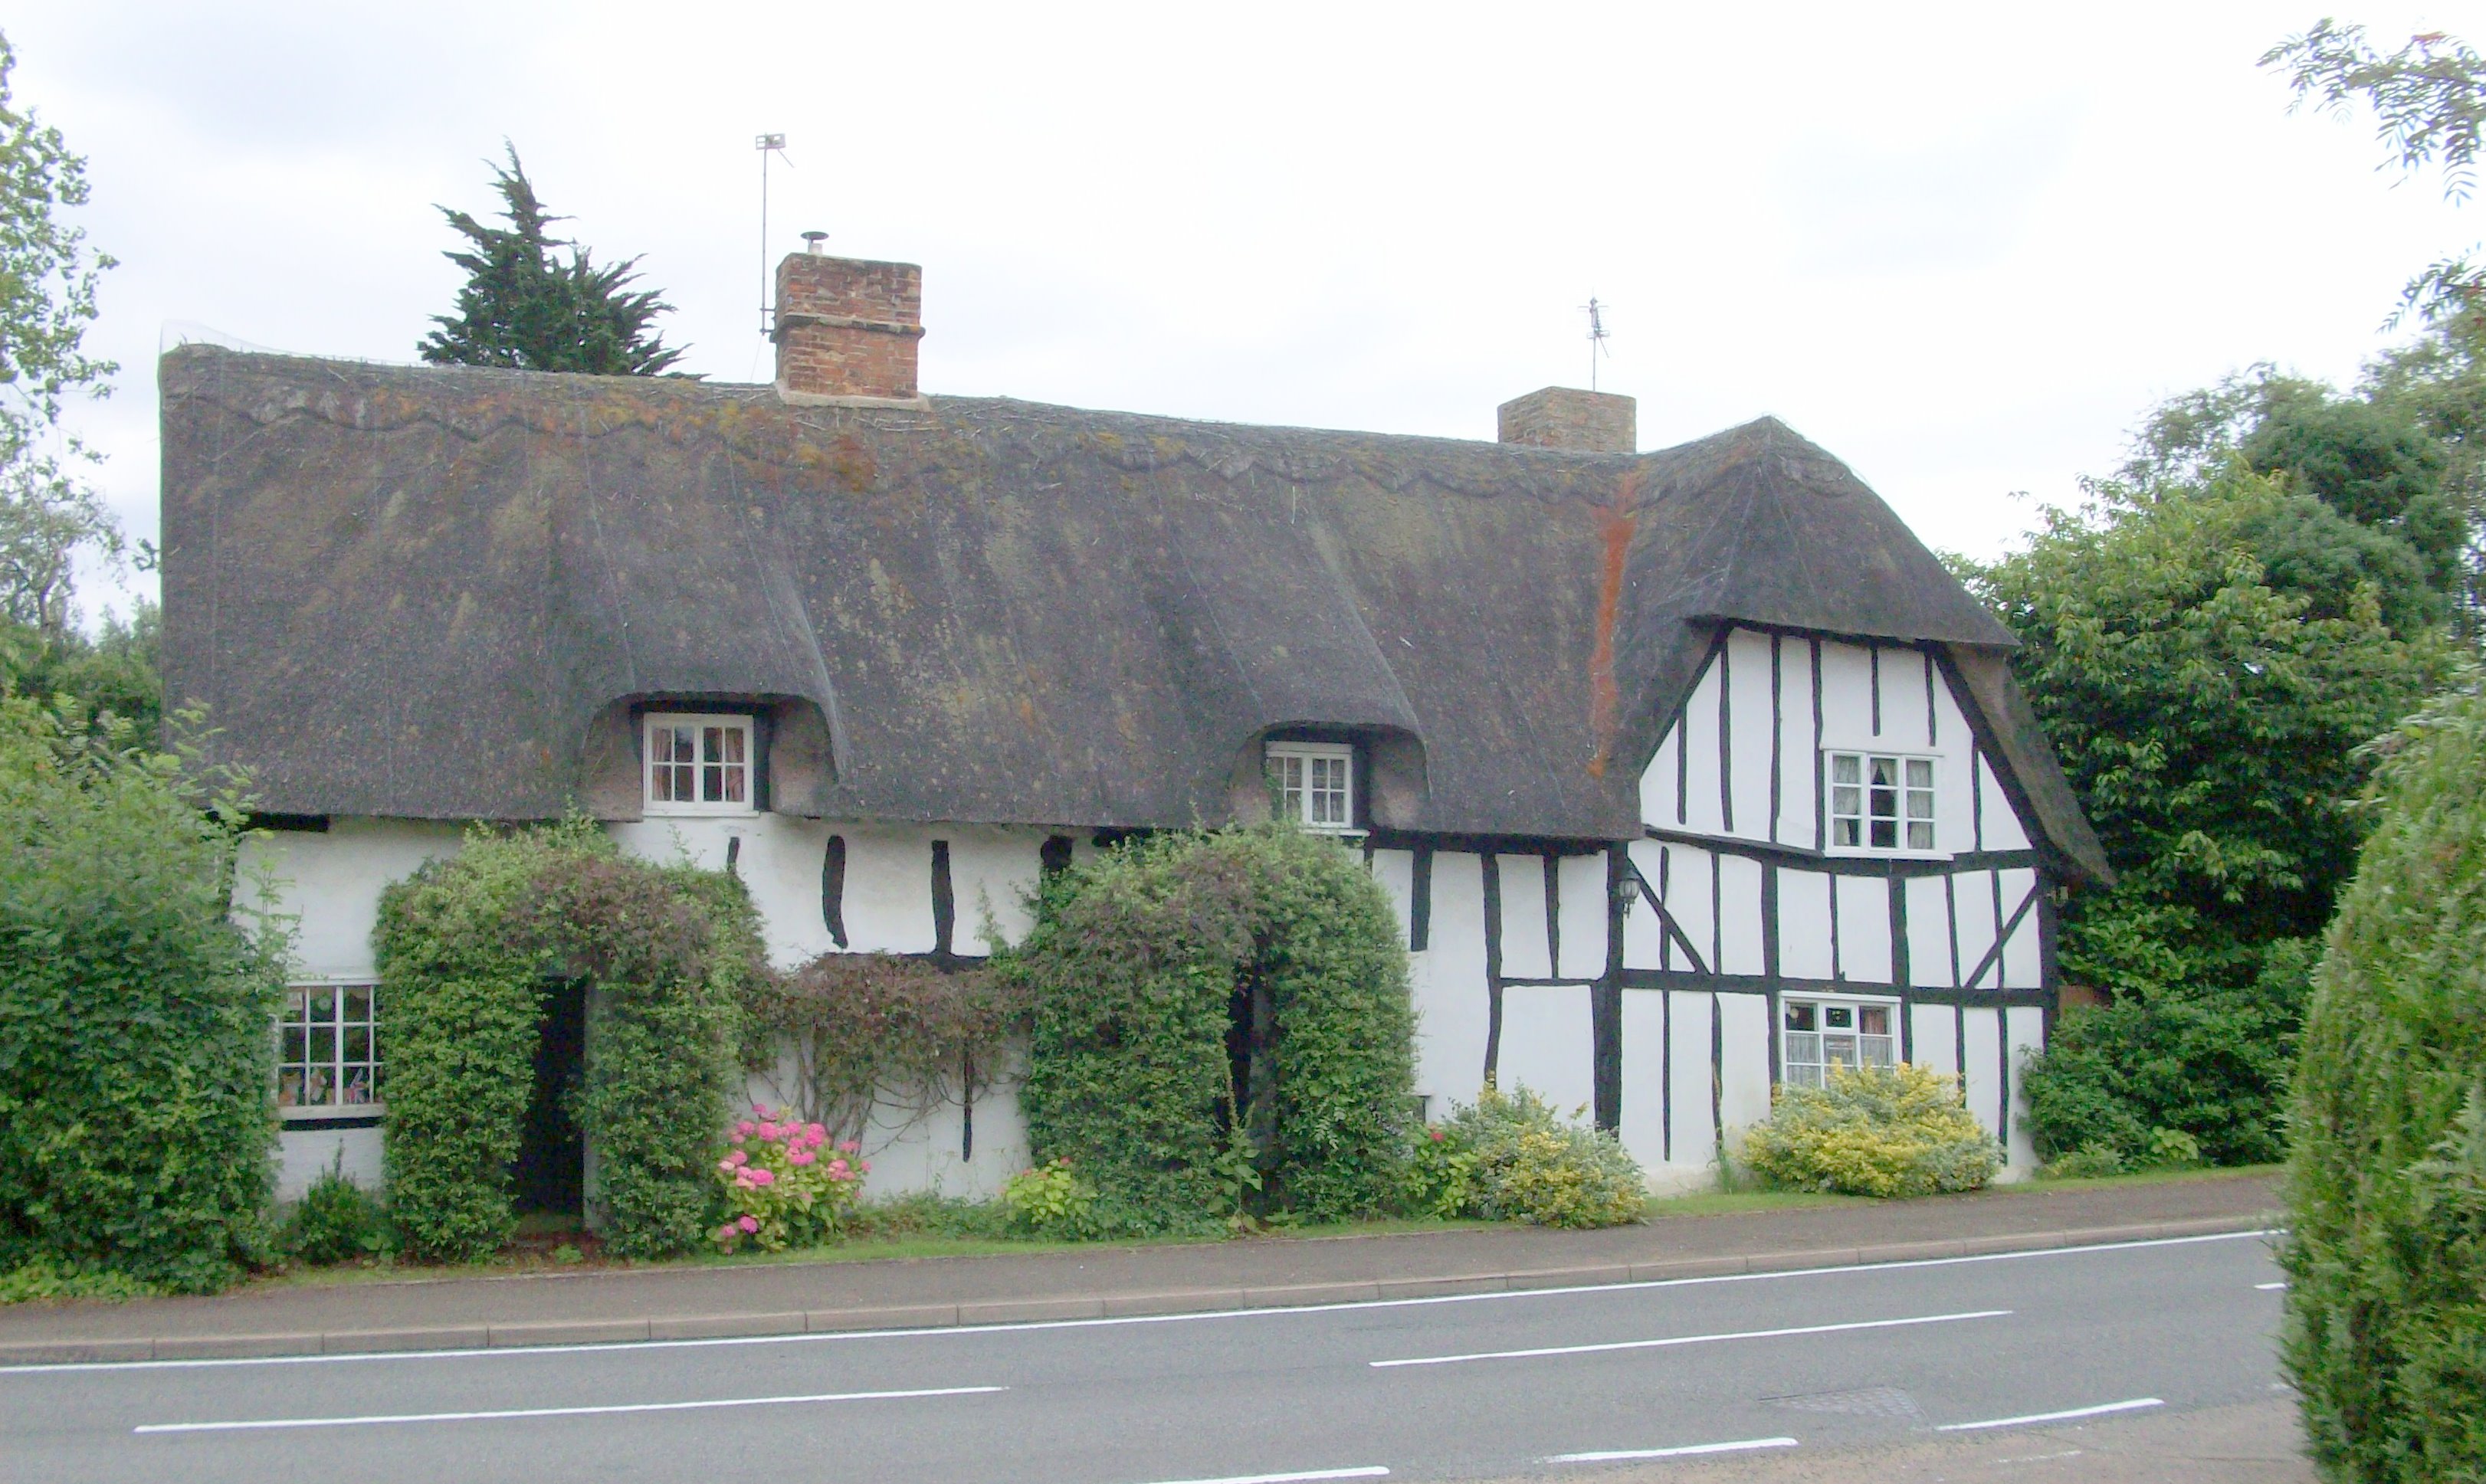 Thatched Roof Glatton 15th Century Cottage Once The Home Of